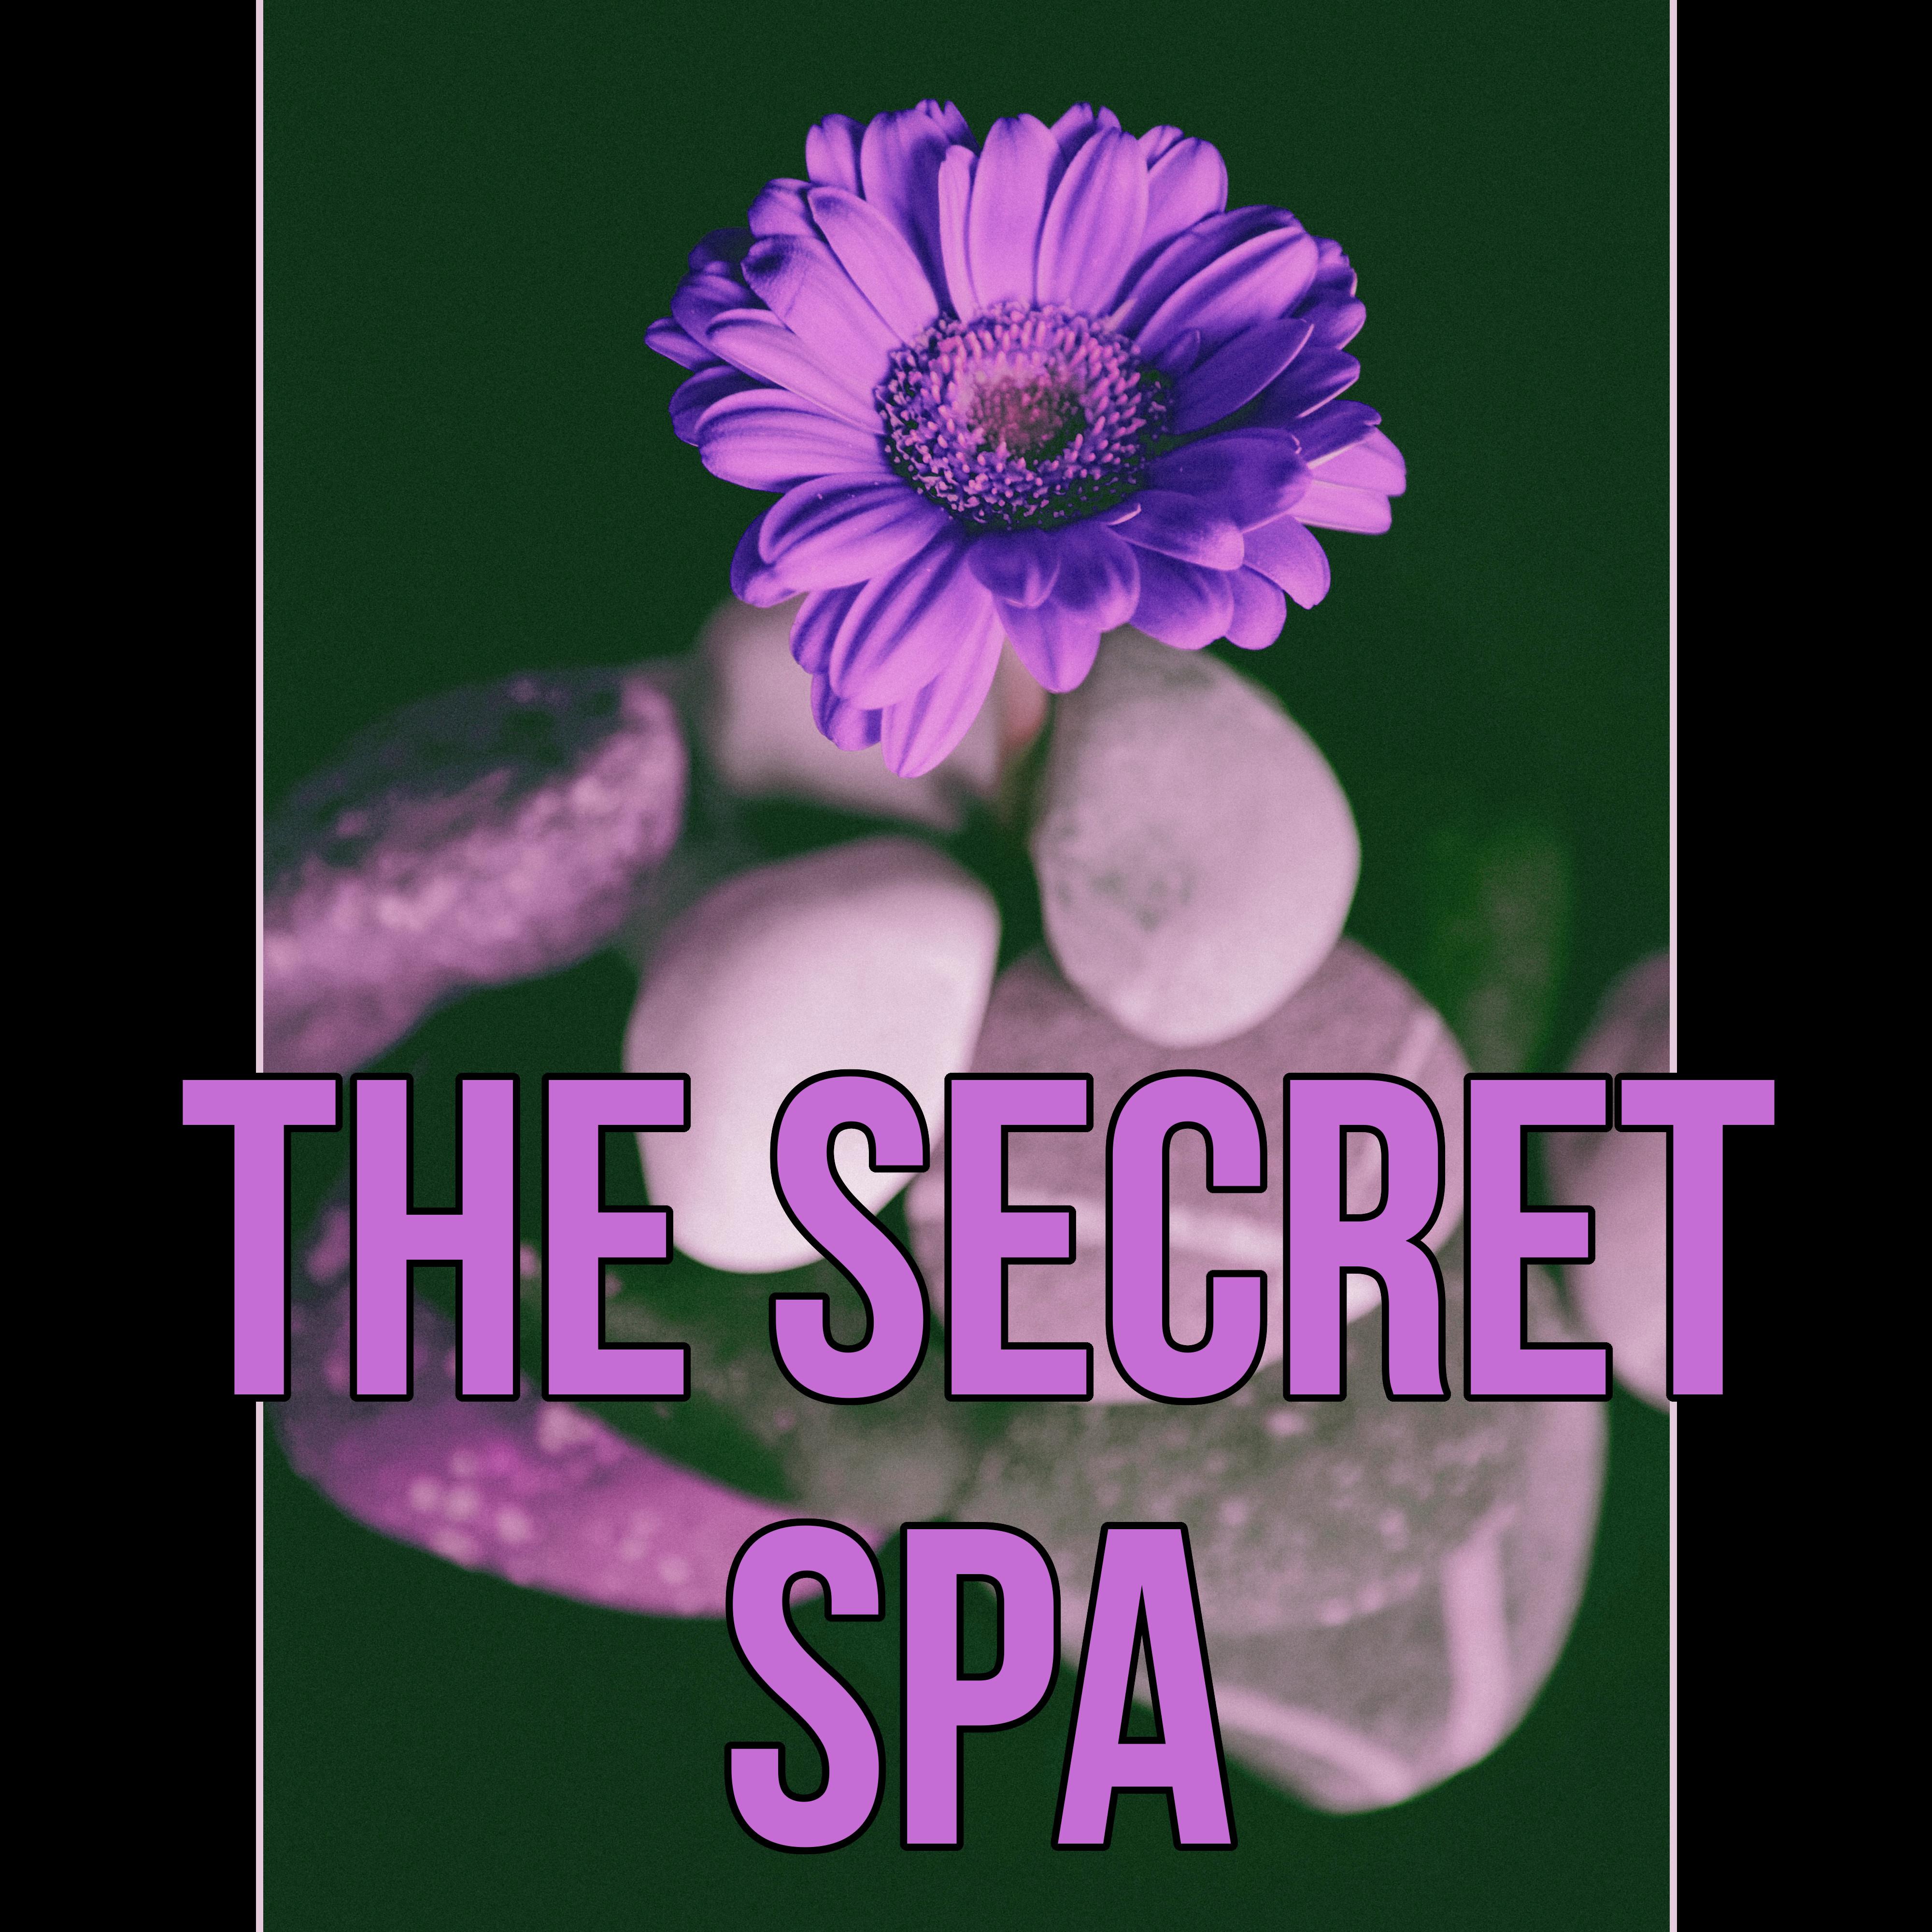 The Secret Spa - In Harmony with Nature Sounds, Pacific Ocean Waves for Well Being and Healthy Lifestyle, Yin Yoga, Massage Therapy, Home Spa